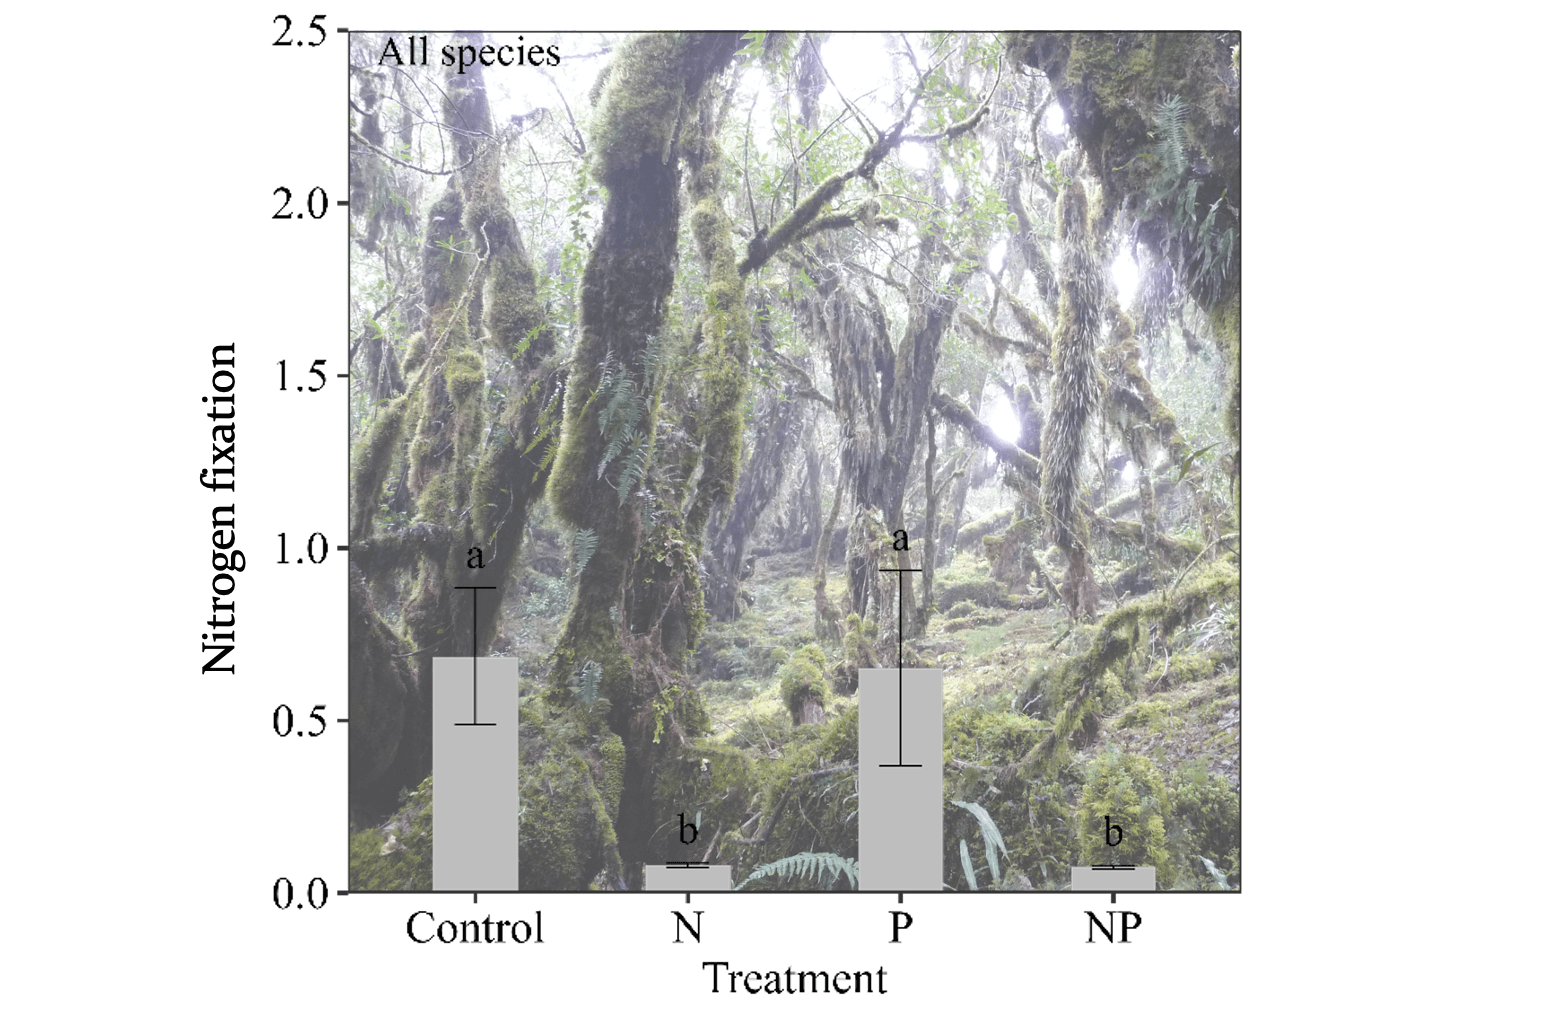 Do Nitrogen and Phosphorus Additions Affect Nitrogen Fixation Associated with Tropical Mosses?